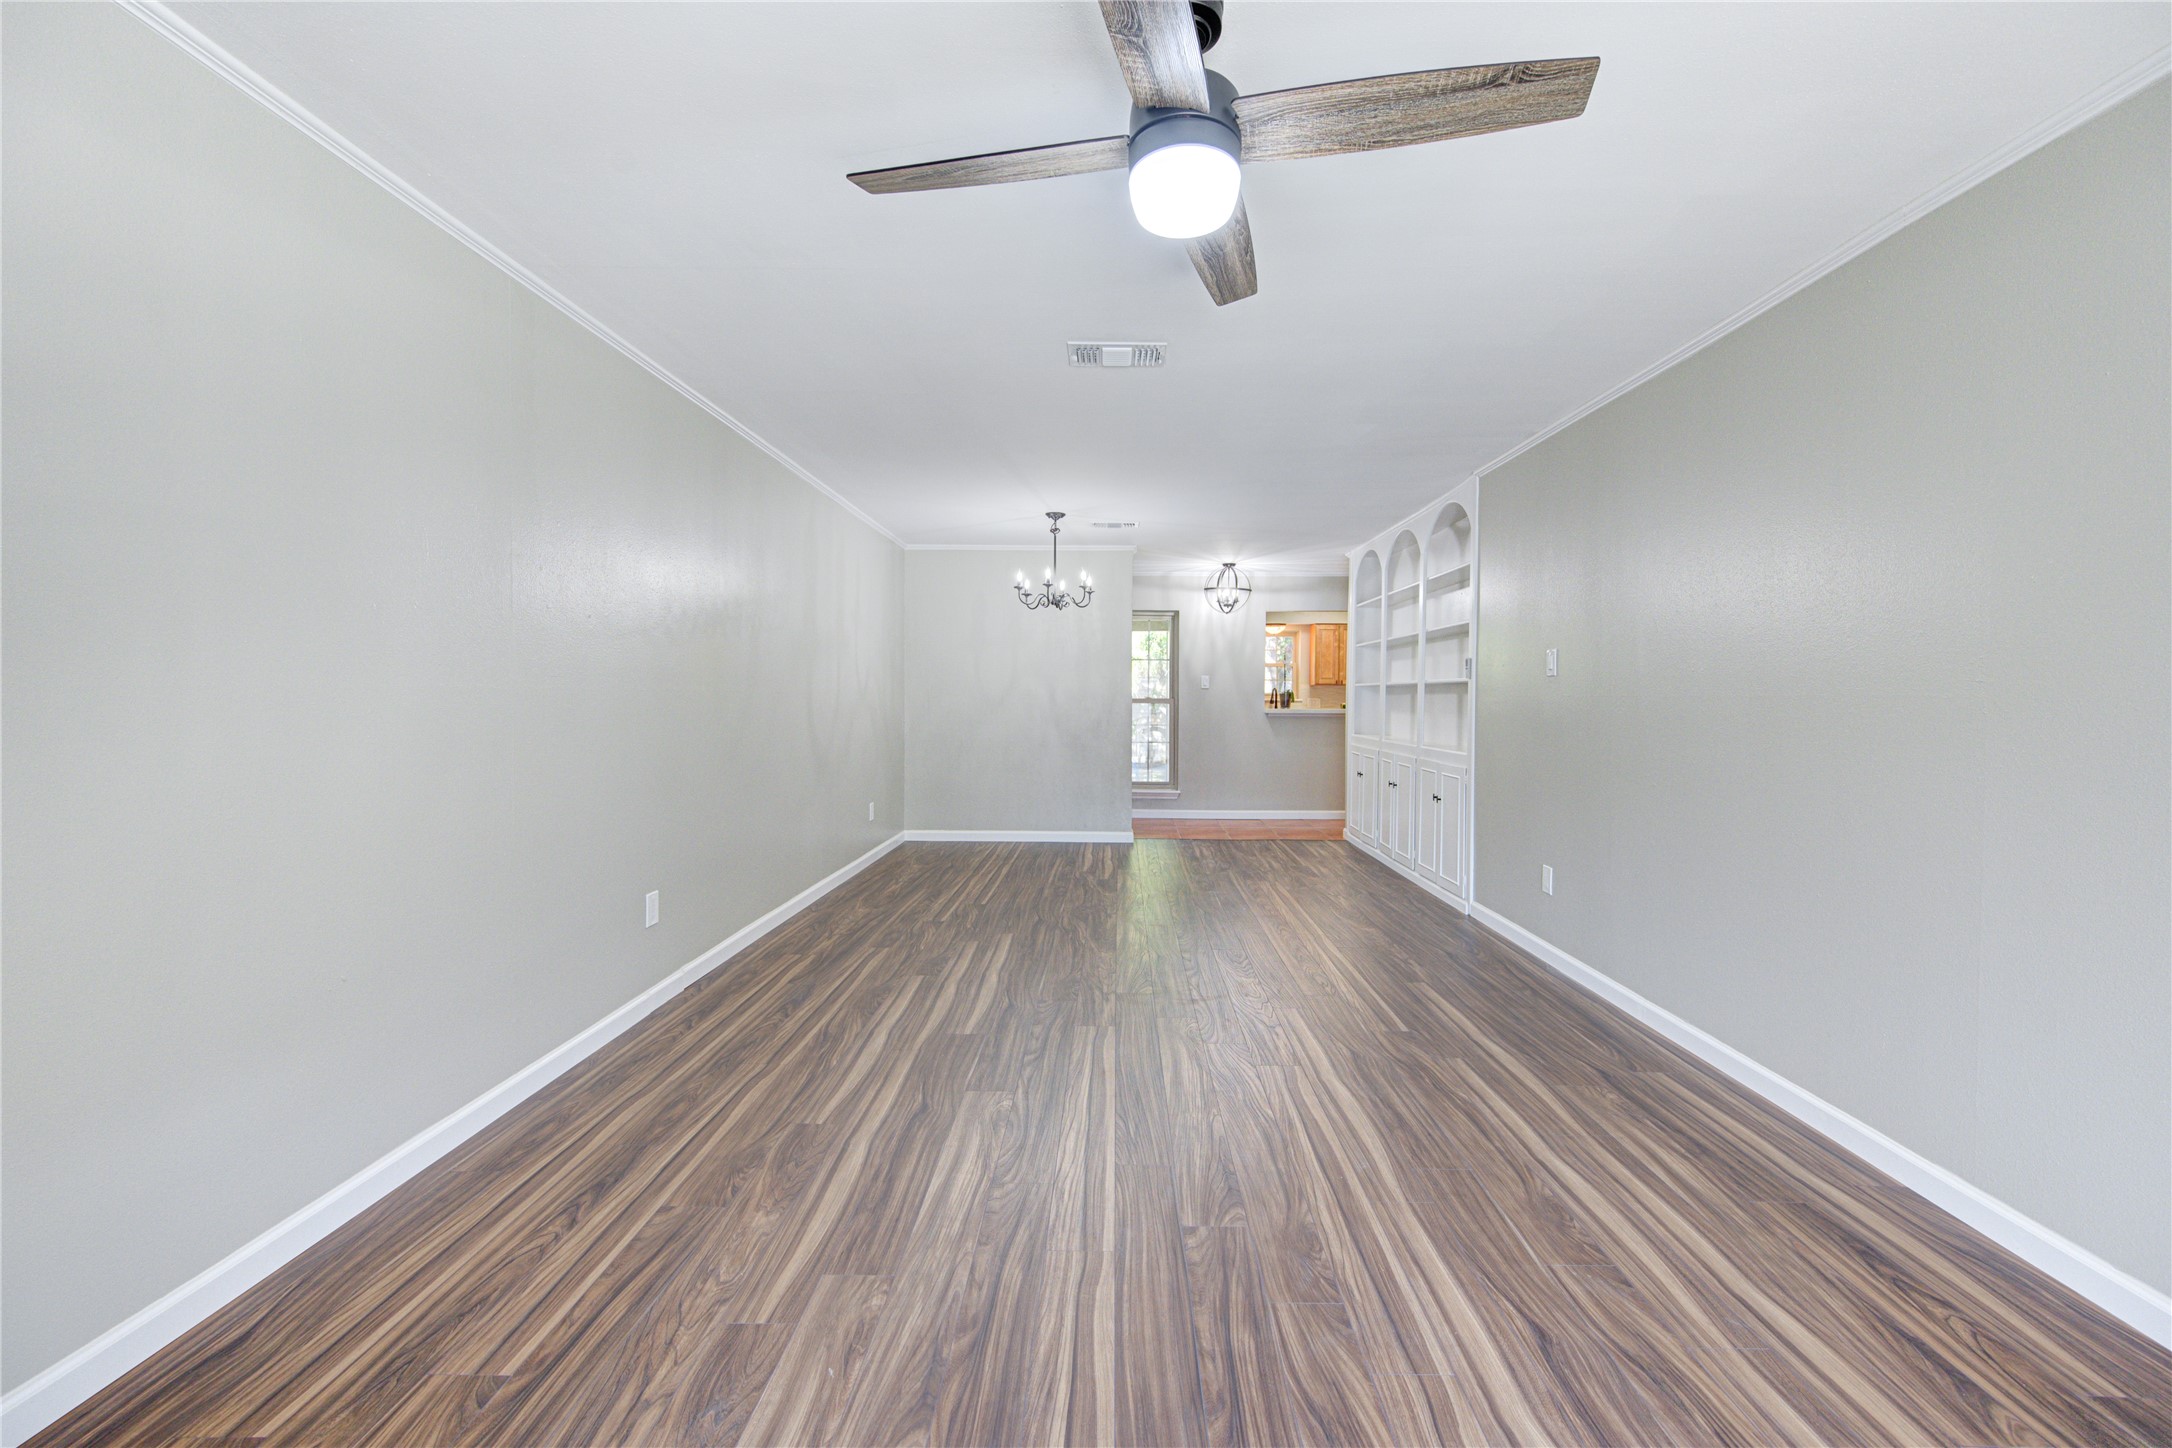 The new laminate flooring flows through the living/dining room, the main hallway, and into both bedrooms. Each room has a new sleek ceiling fan to reduce our sky-high electric charges.